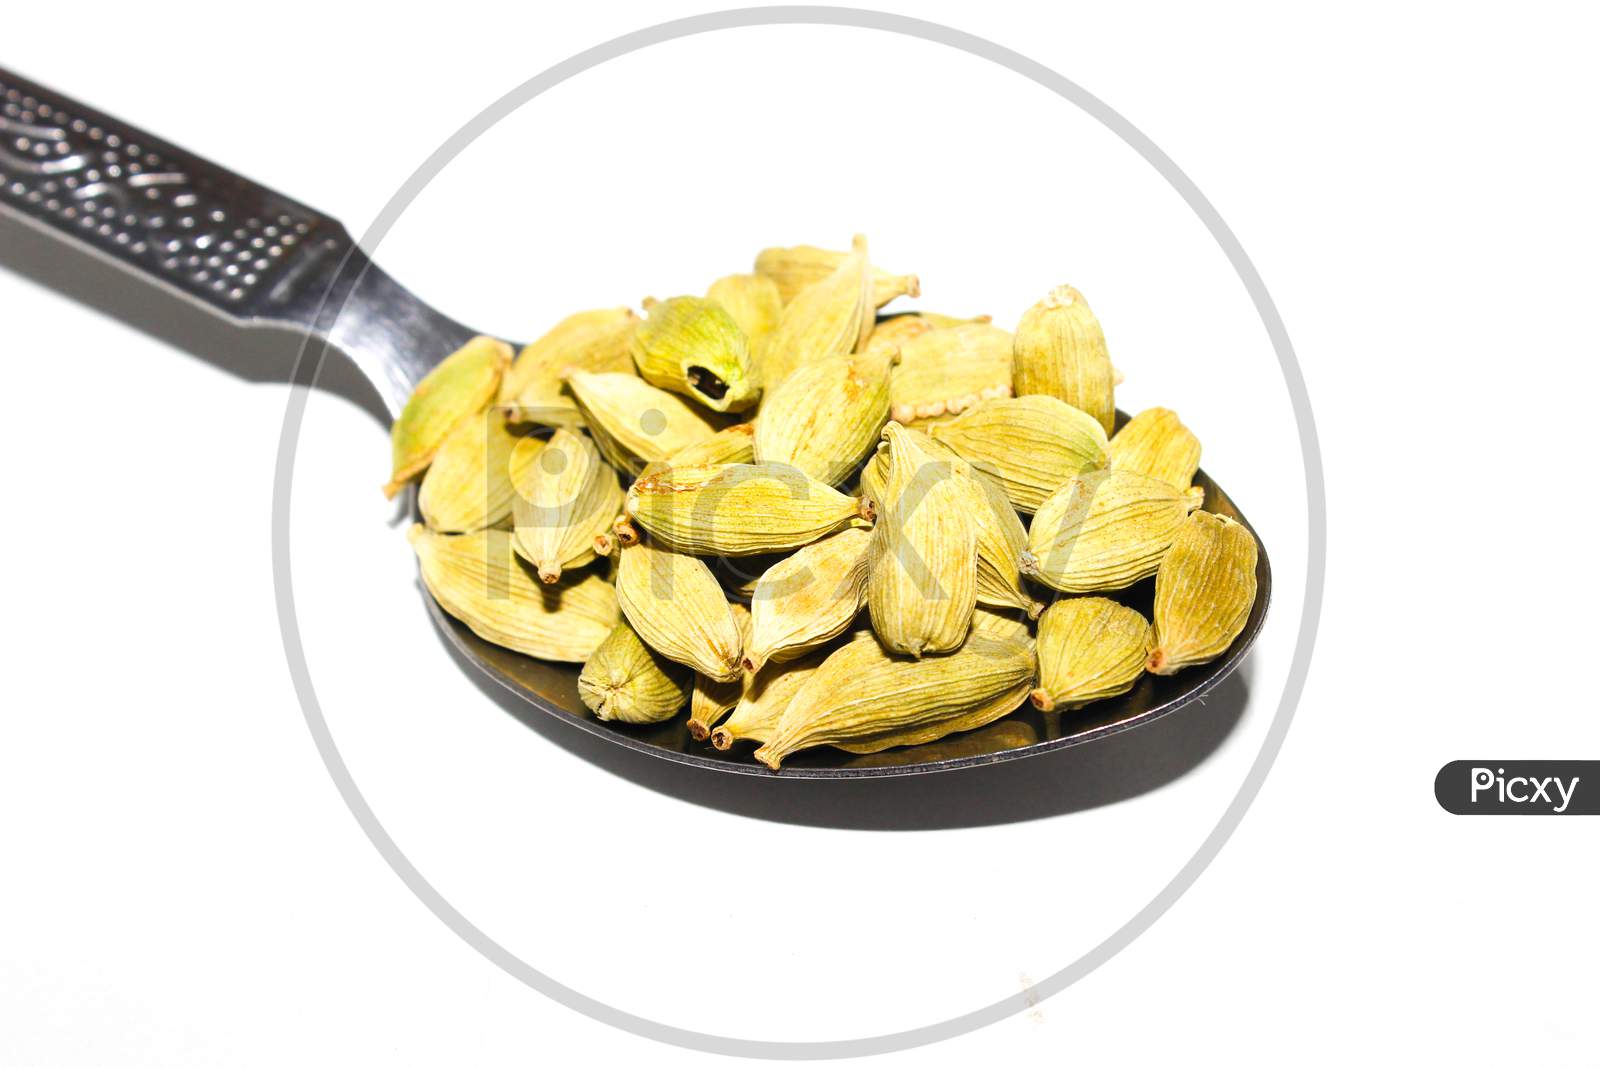 A picture of cardamom